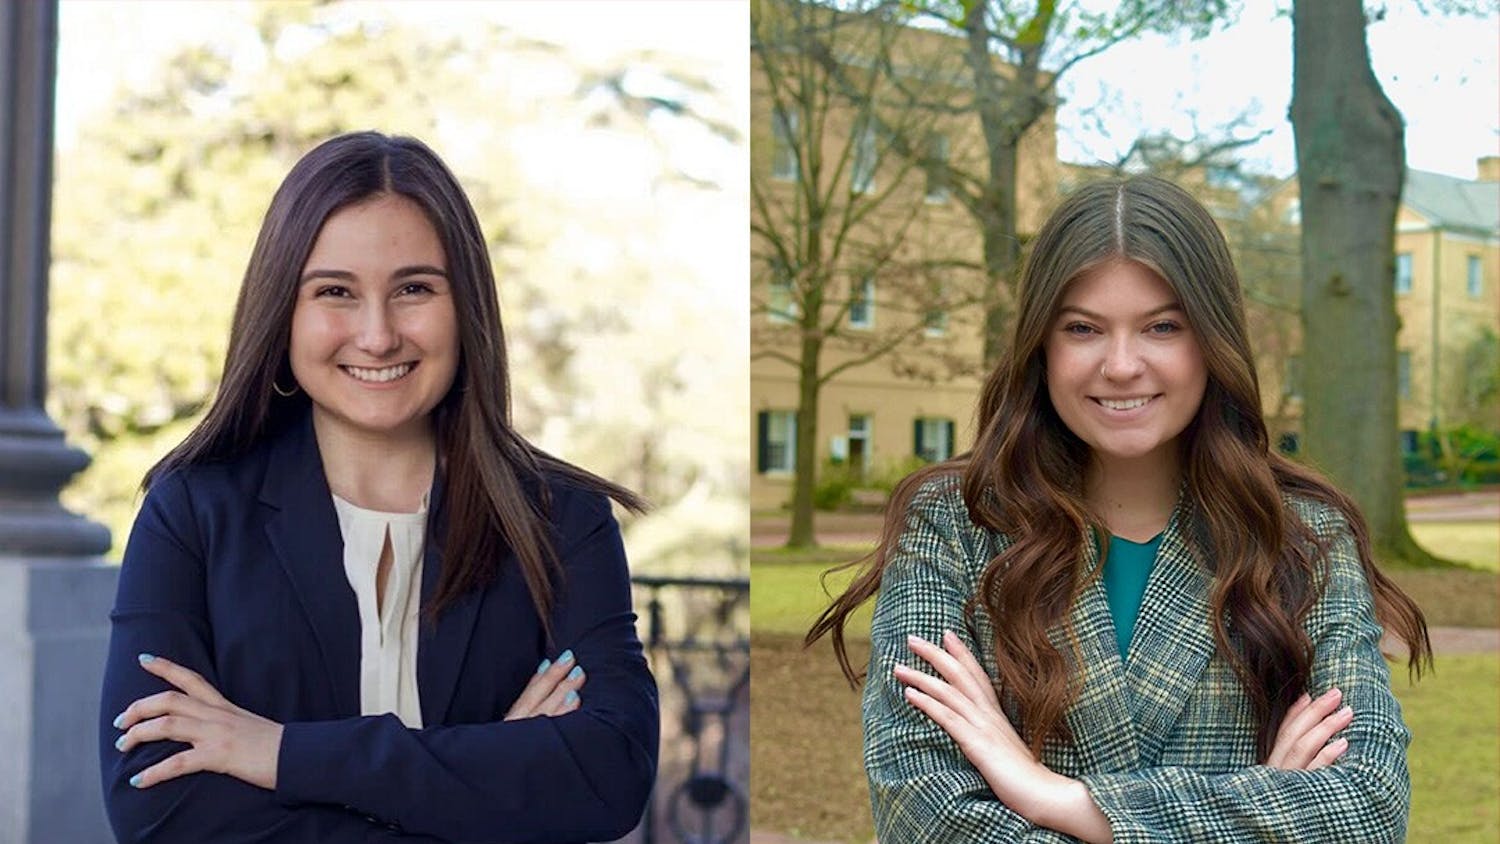 Maia Porzio (left) and Faith Gravley (right) are the candidates running to become the next Student Body Vice President. Students can vote for candidates from Feb. 22 at 9 a.m. to Feb. 23 at 5 p.m. Ballots will be available online.